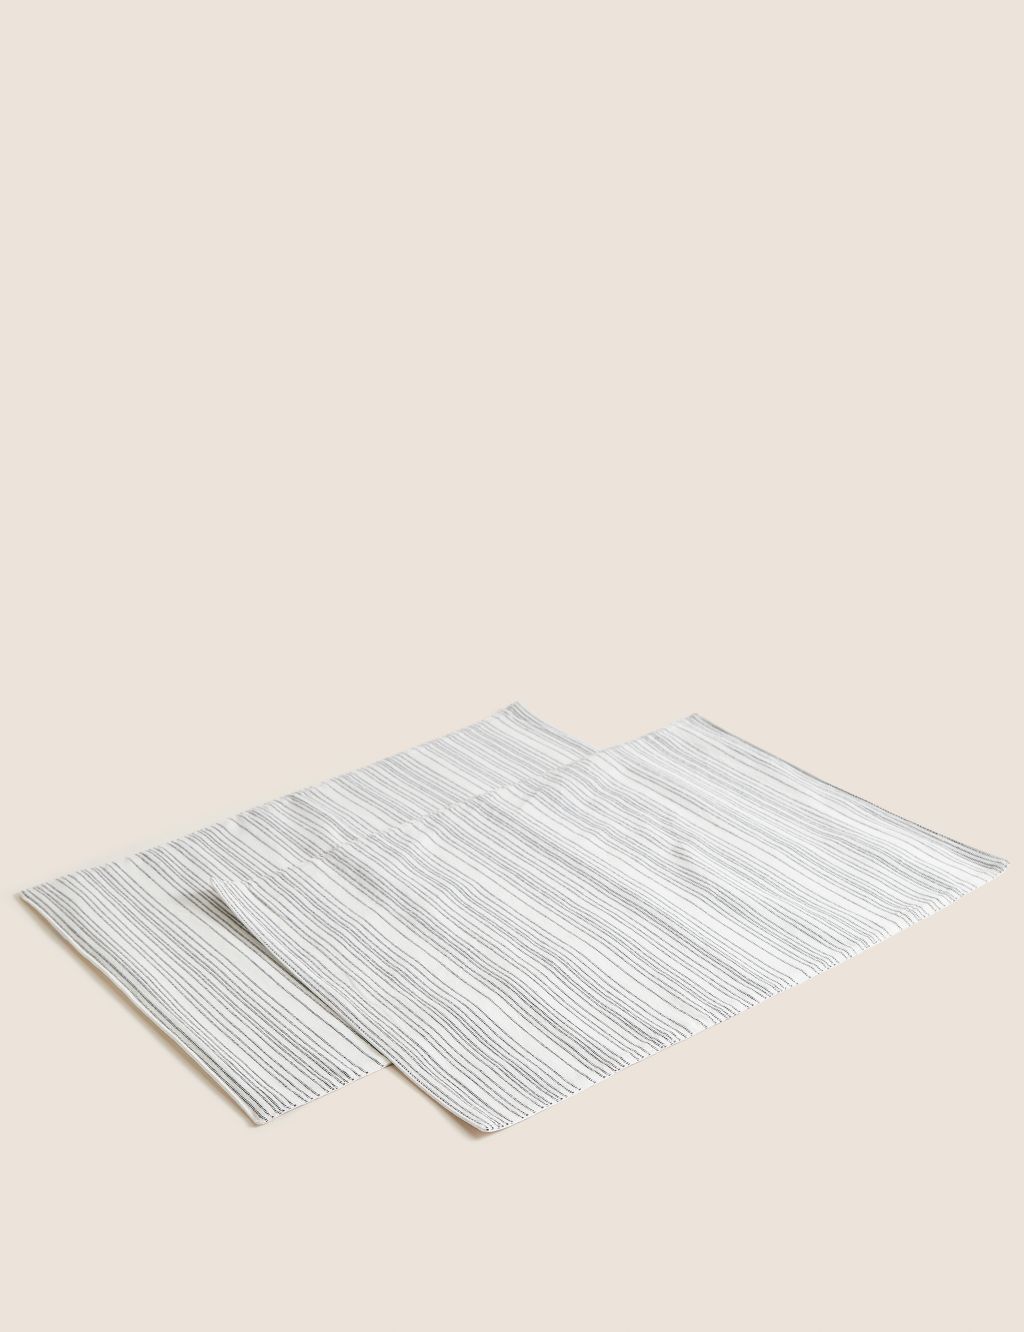 Set of 2 Cotton Striped Placemats image 1